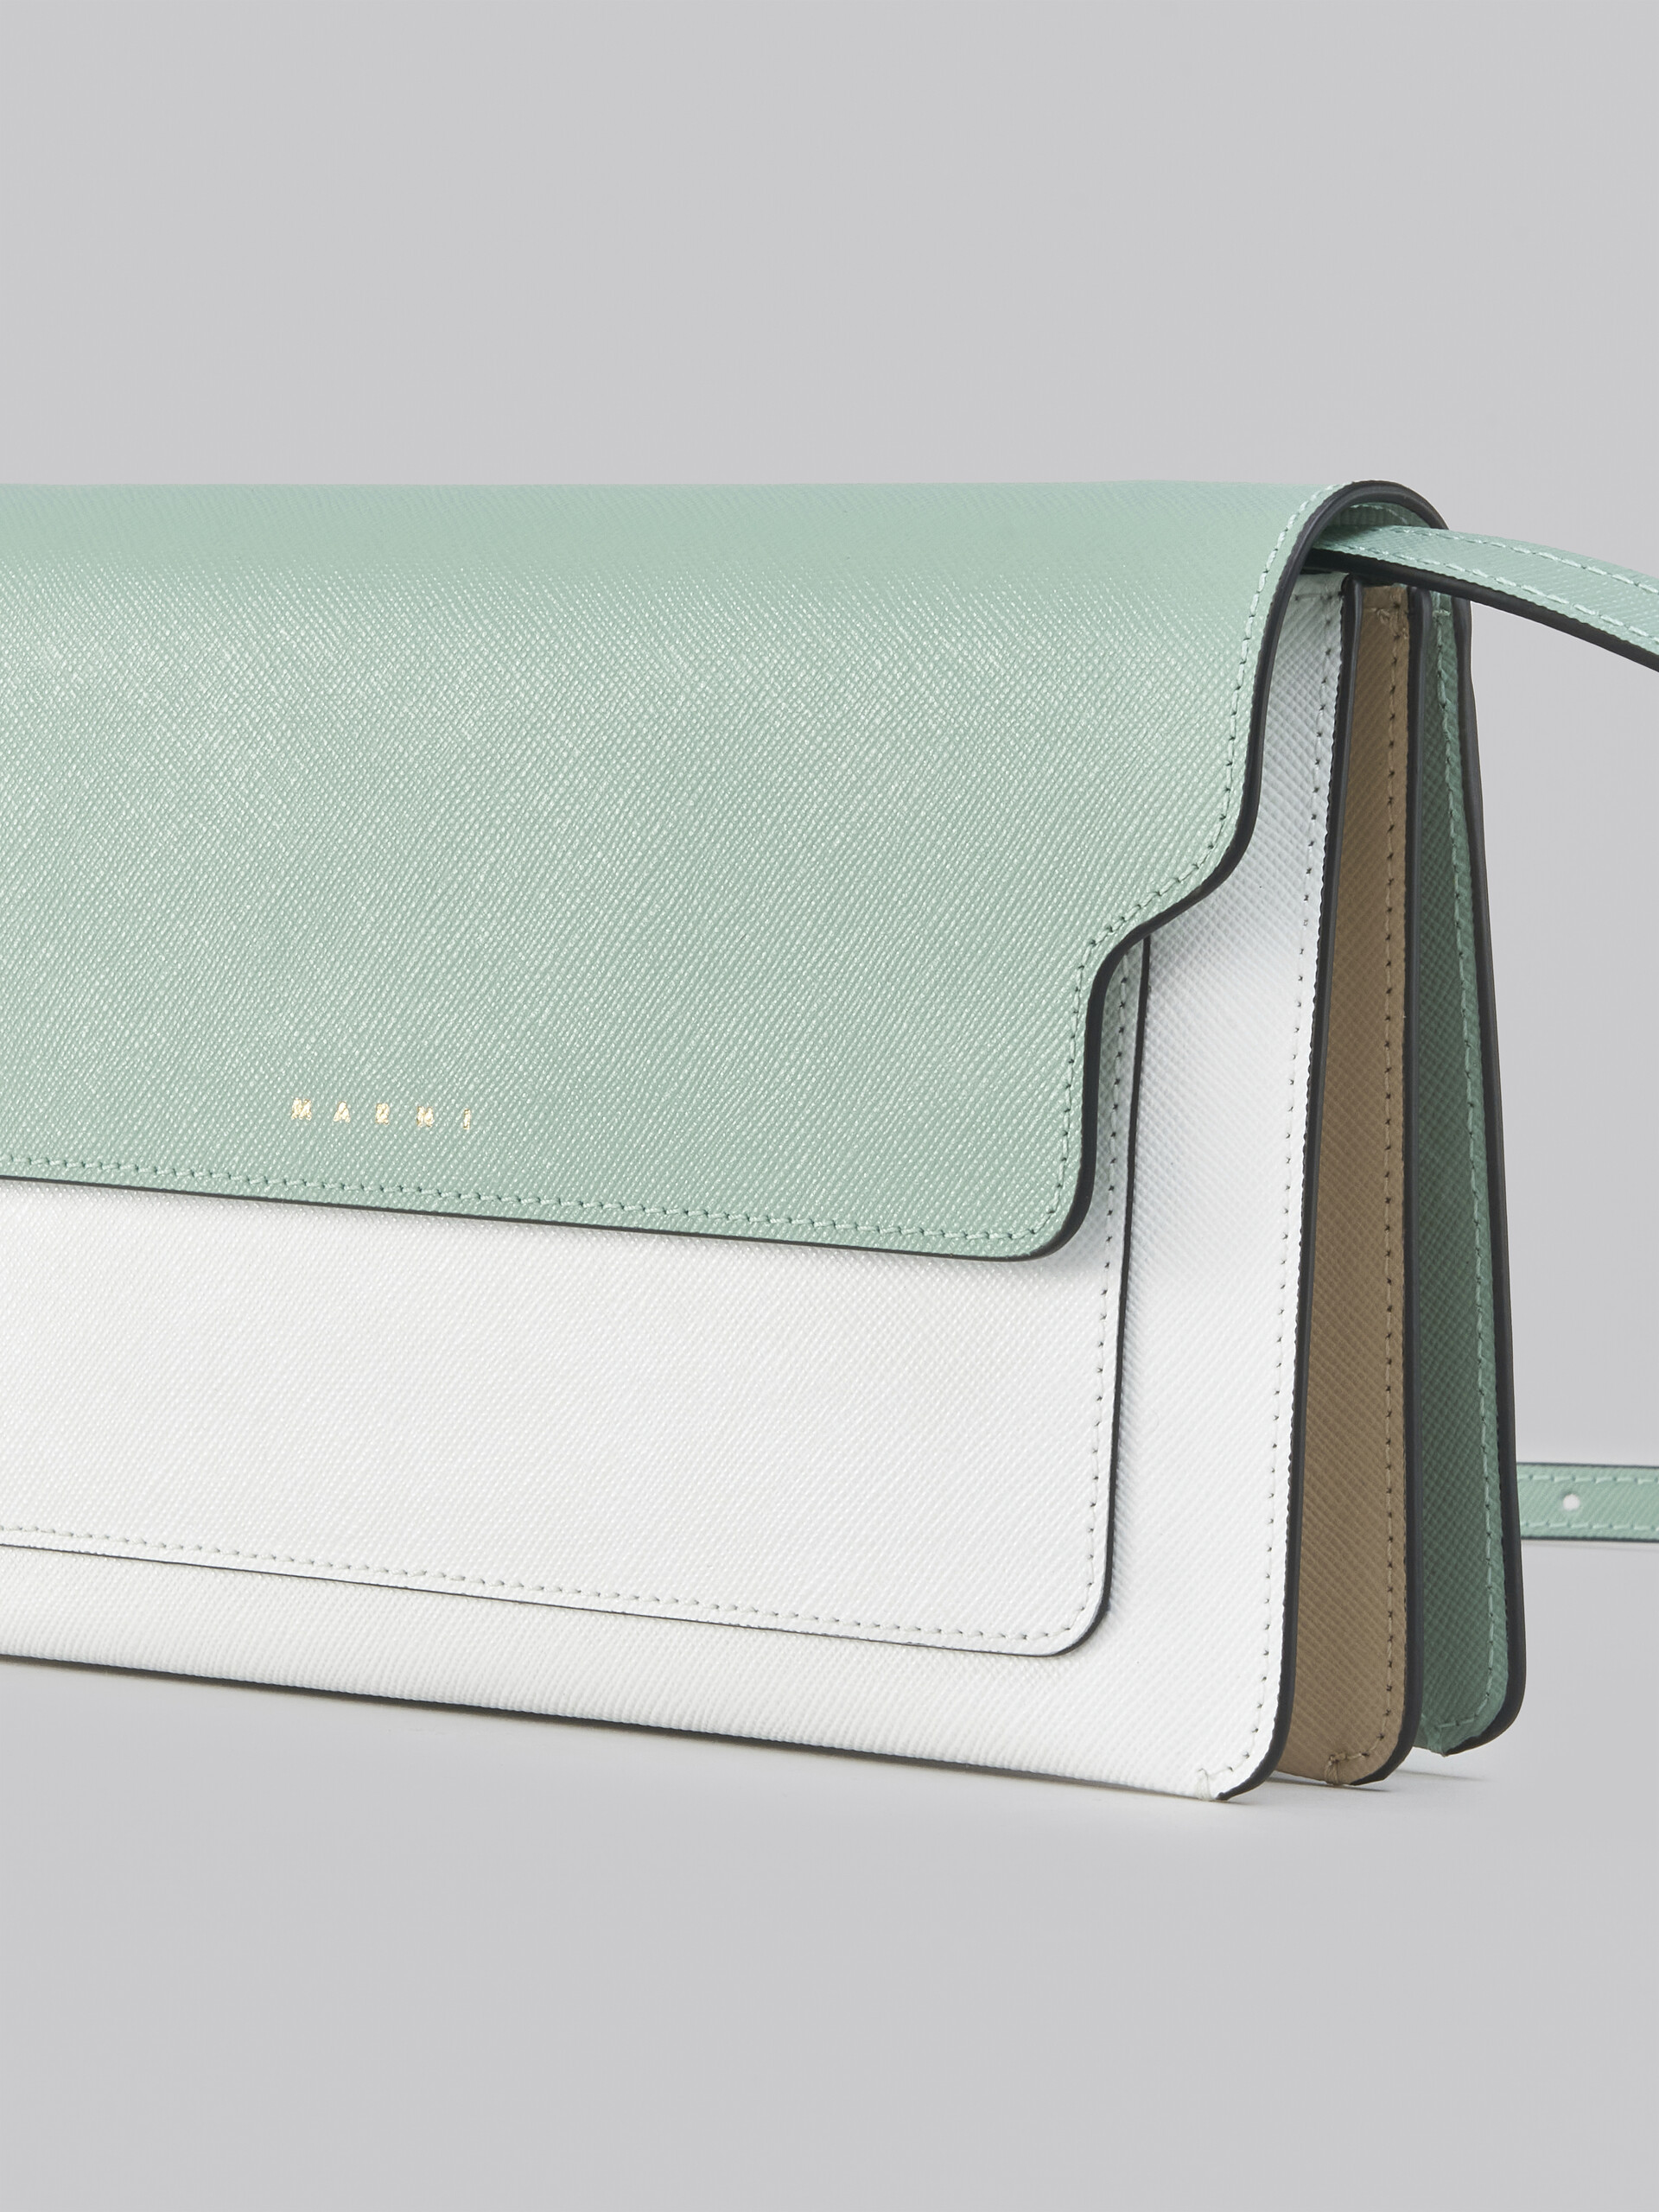 Trunk Clutch in light green white and brown saffiano leather - Pochettes - Image 4